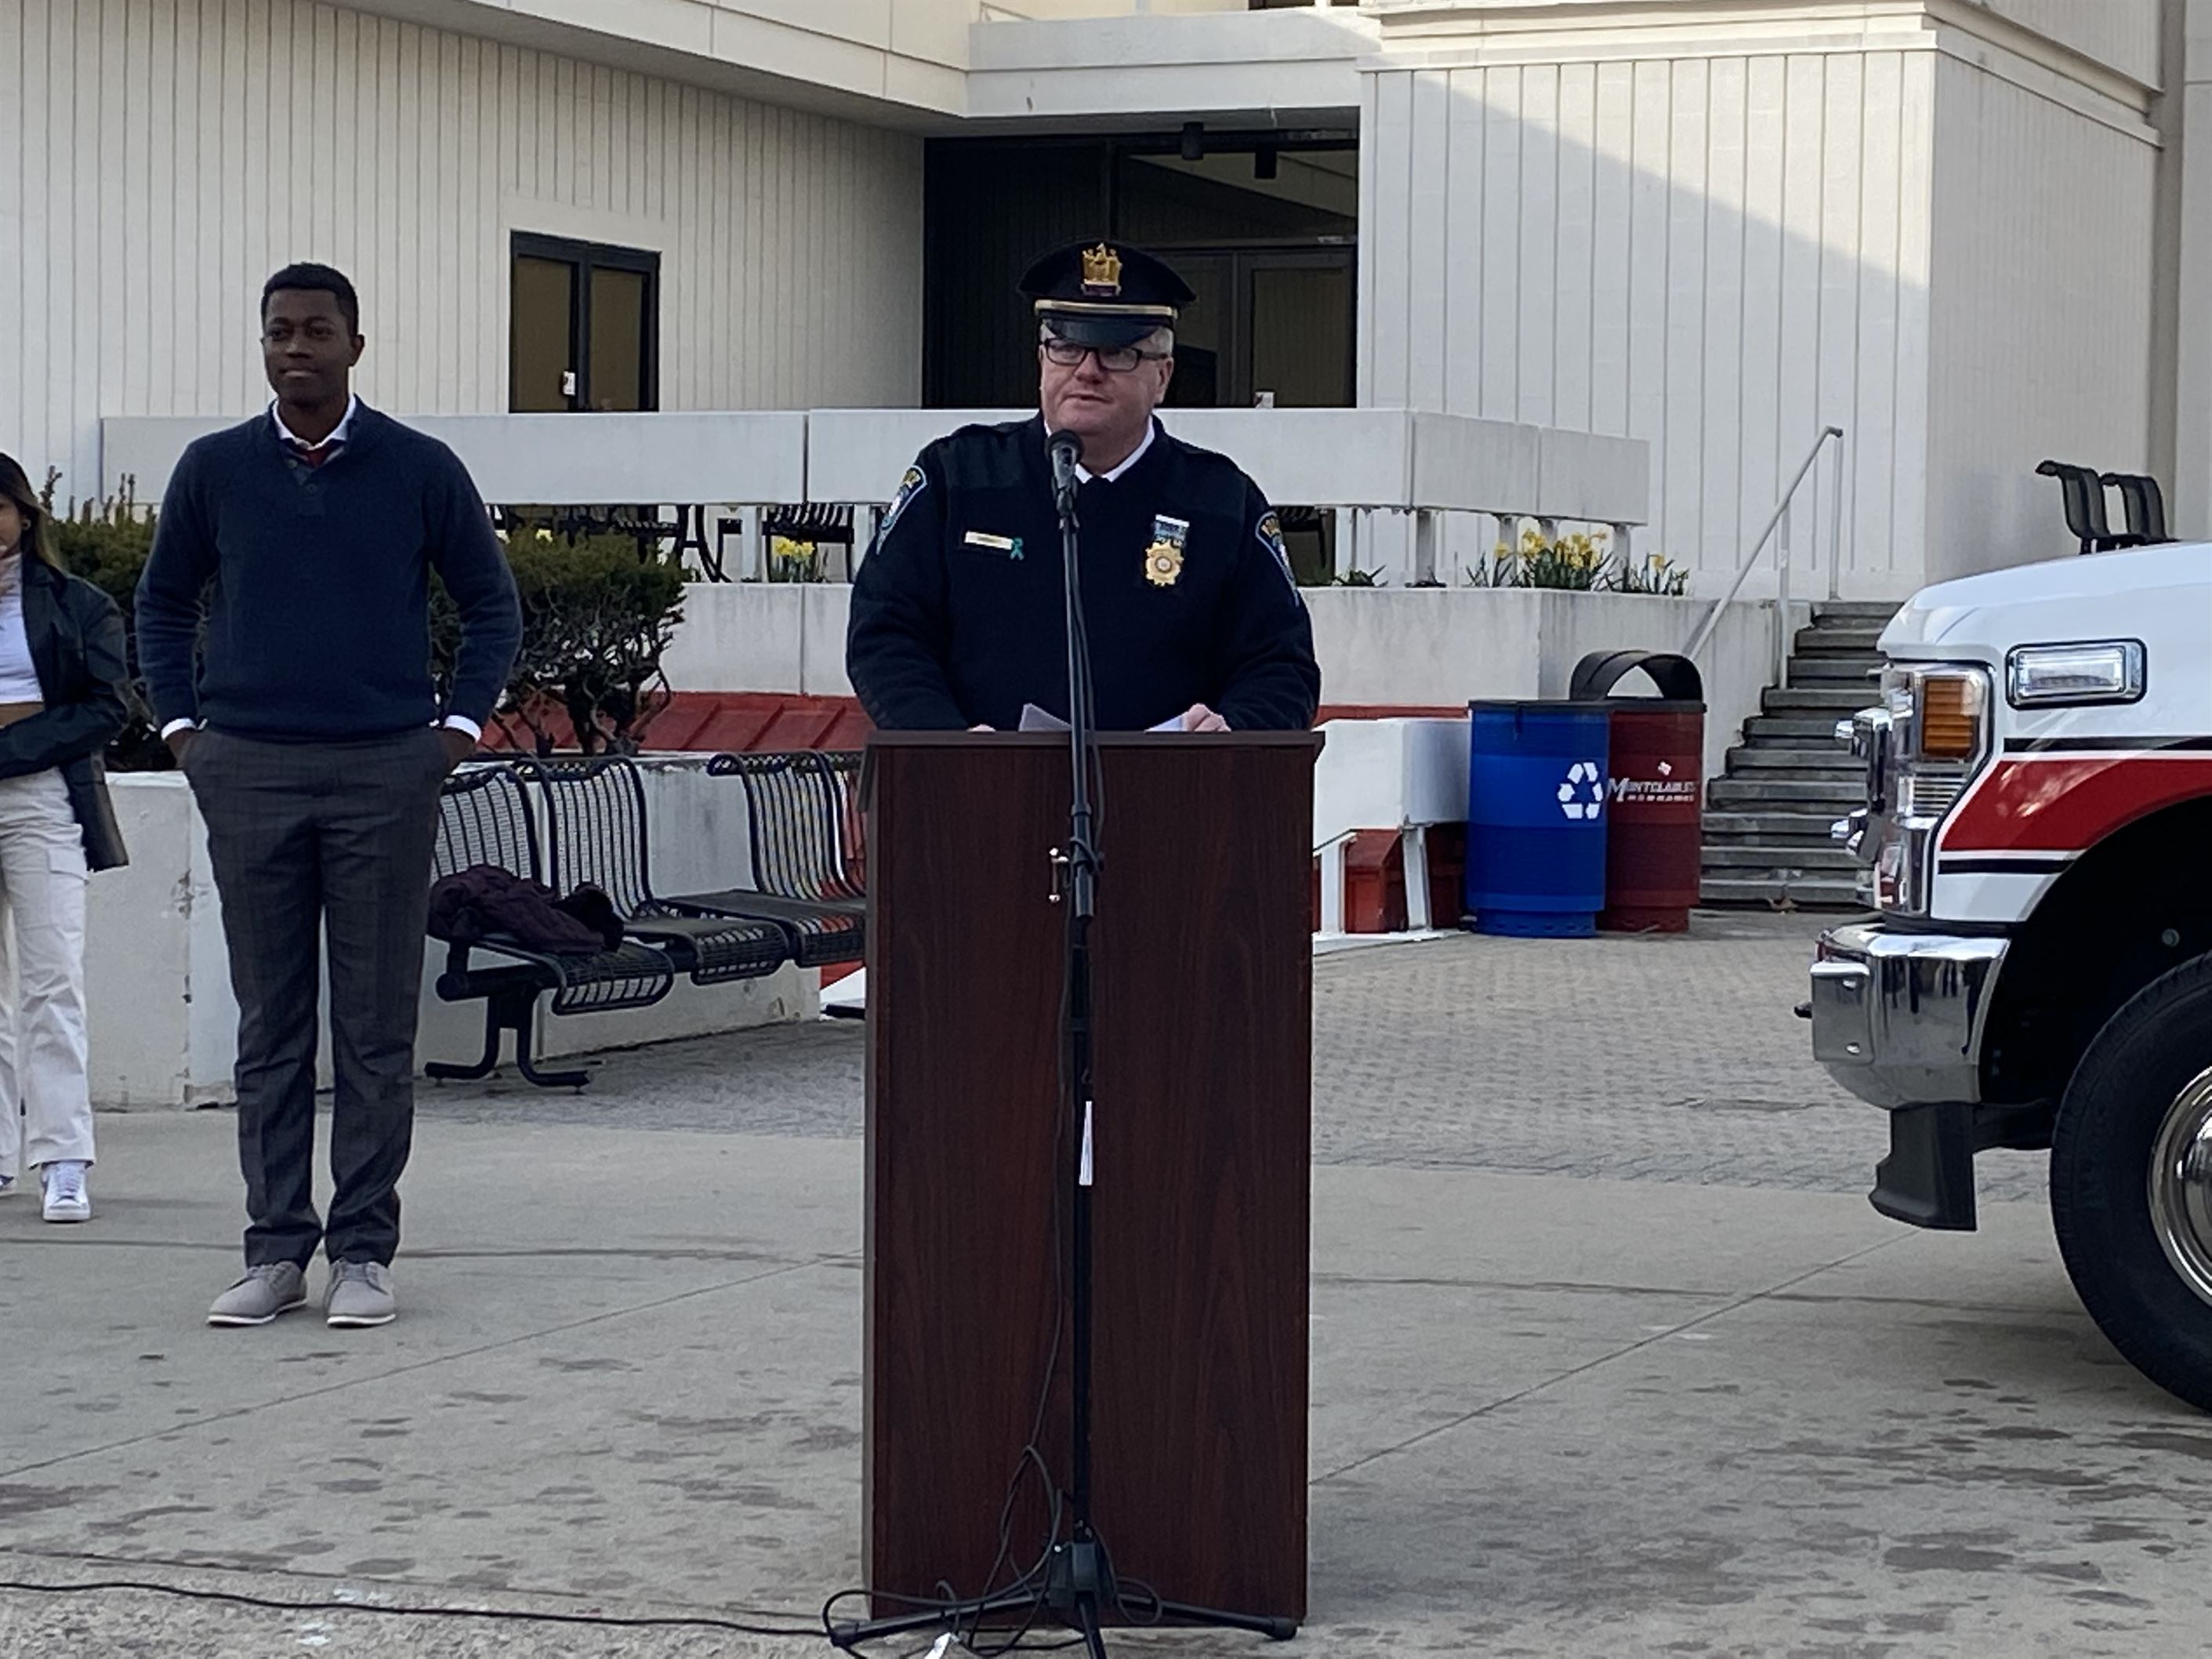 Chief Barret opened the unveiling ceremony with a few words.